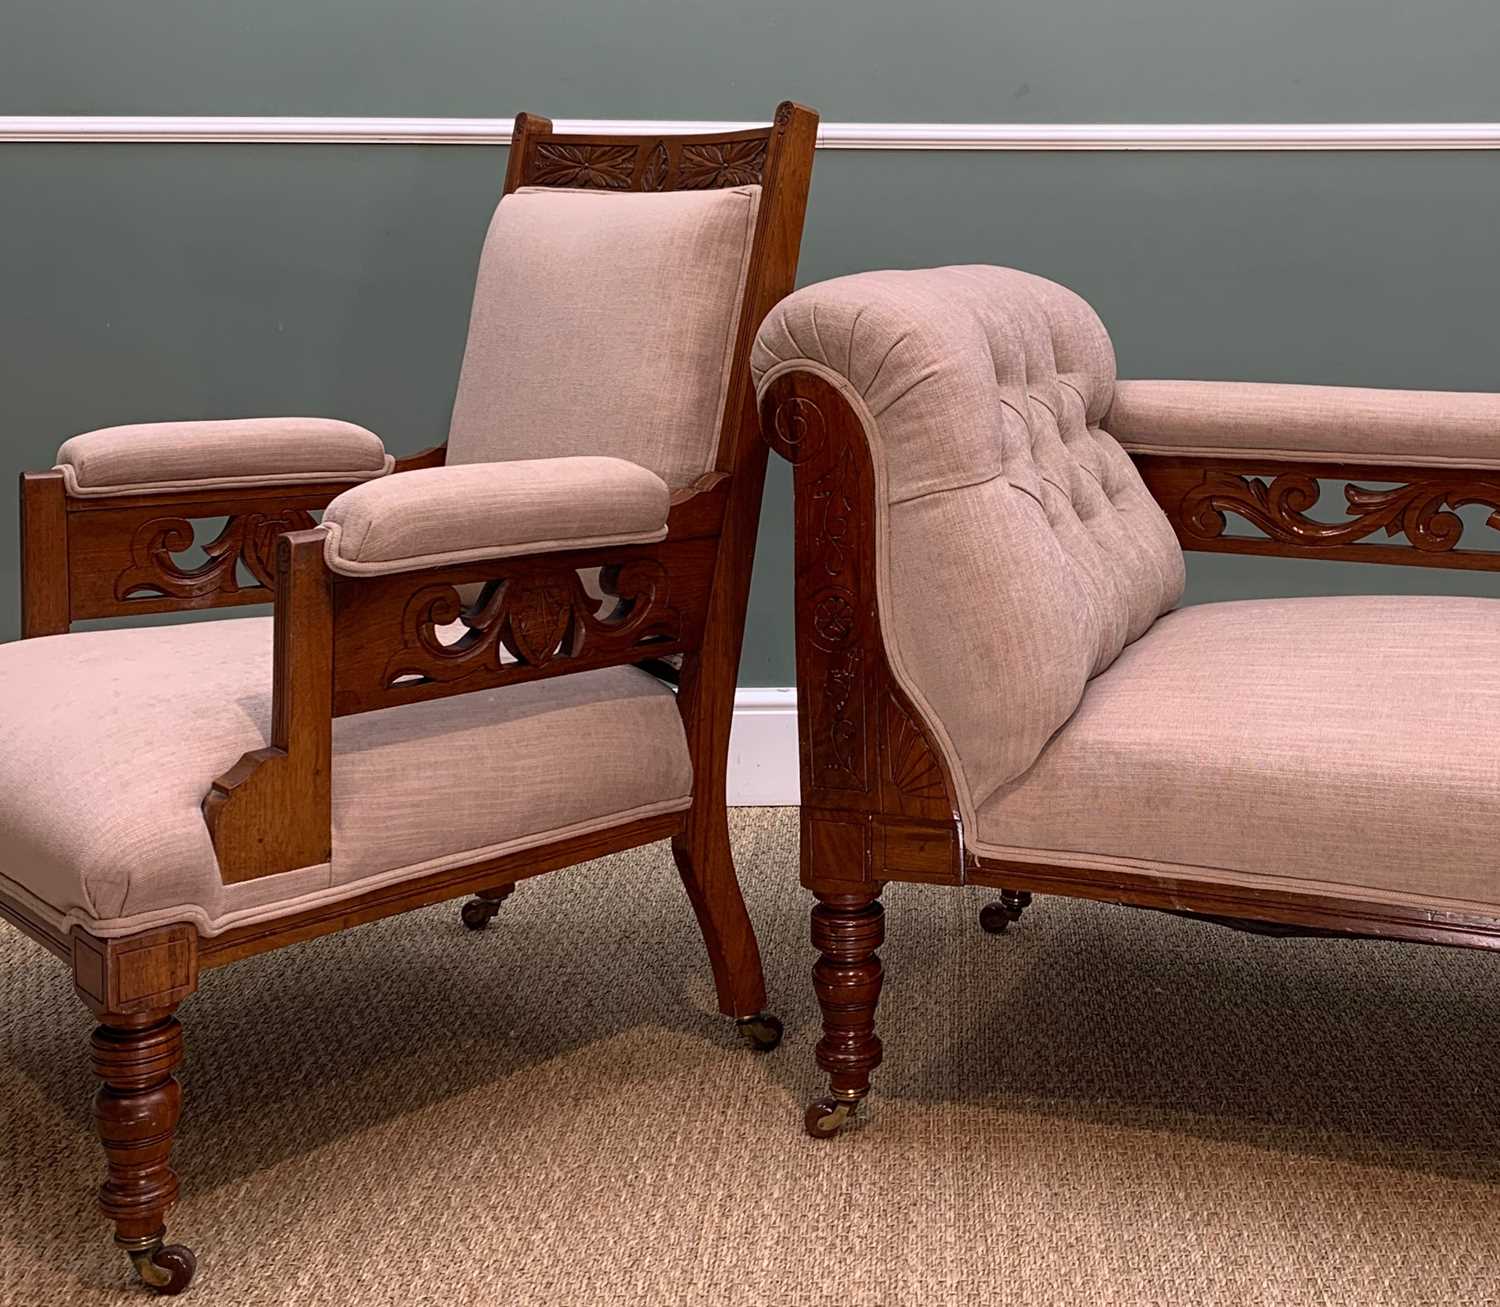 MATCHING VICTORIAN WALNUT CHAISE LONGUE & ARMCHAIR, with carved arms, on brown ceramic castors,